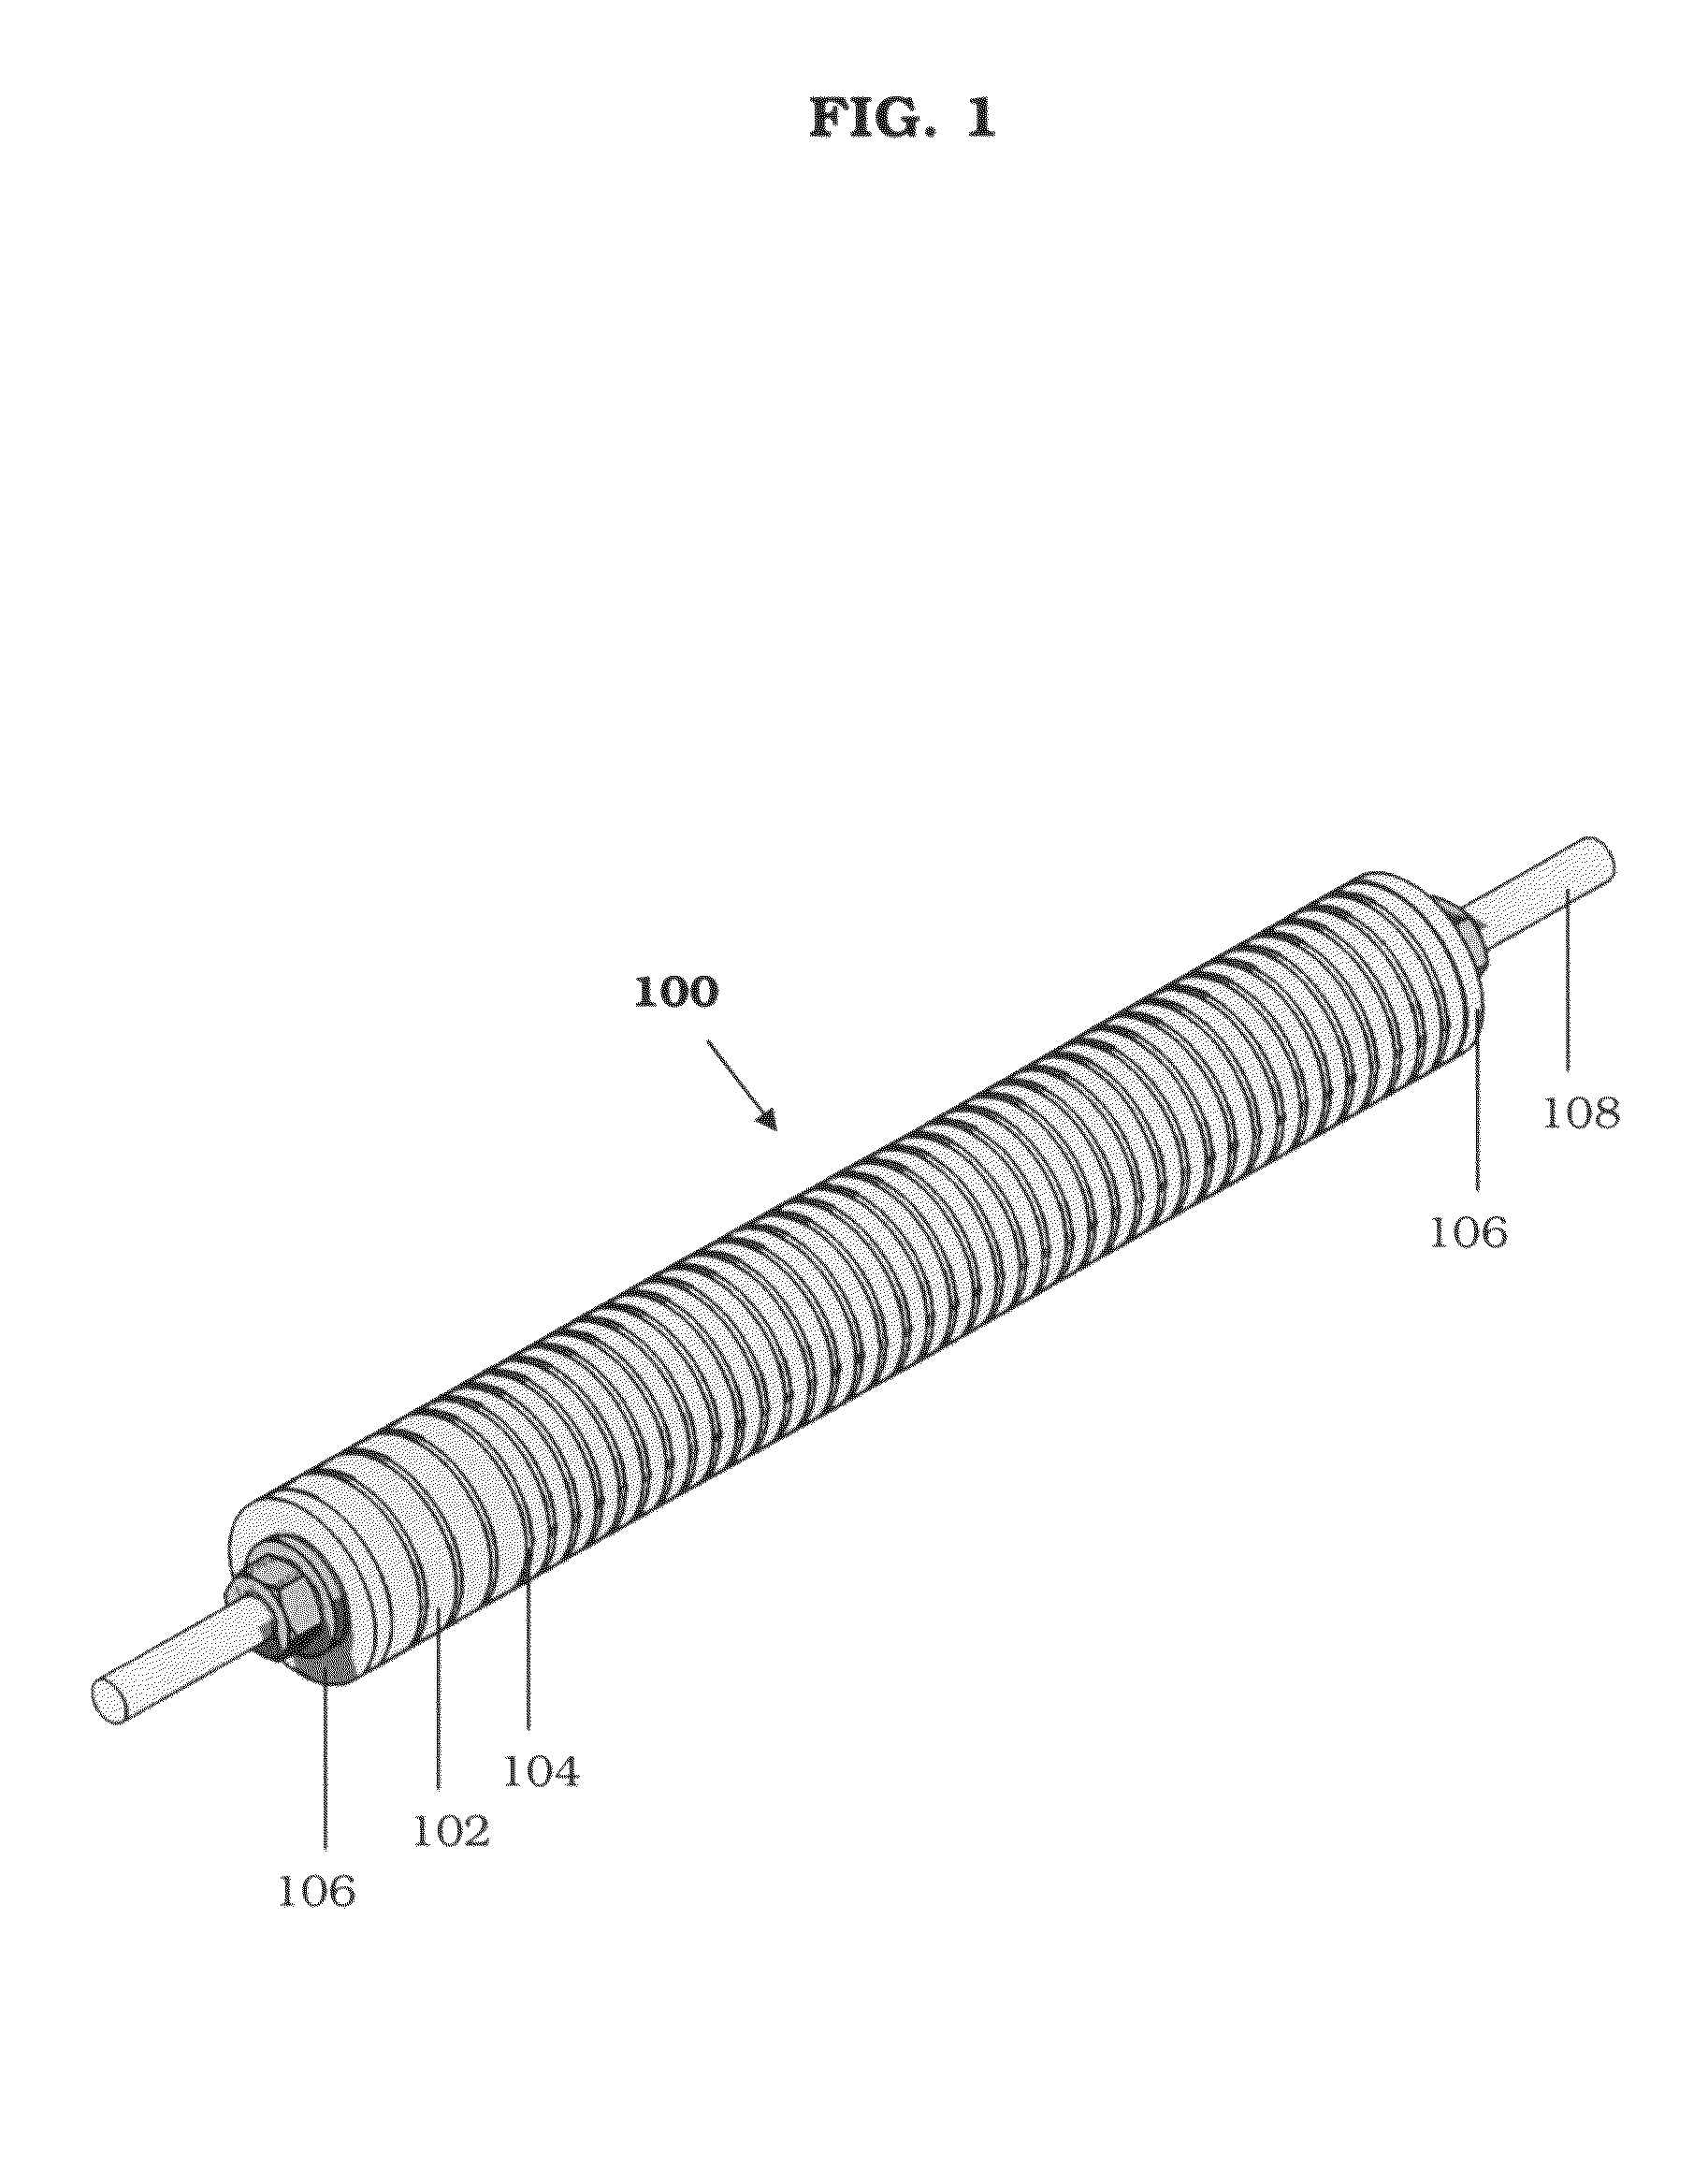 Brachytherapy and radiography target holding device